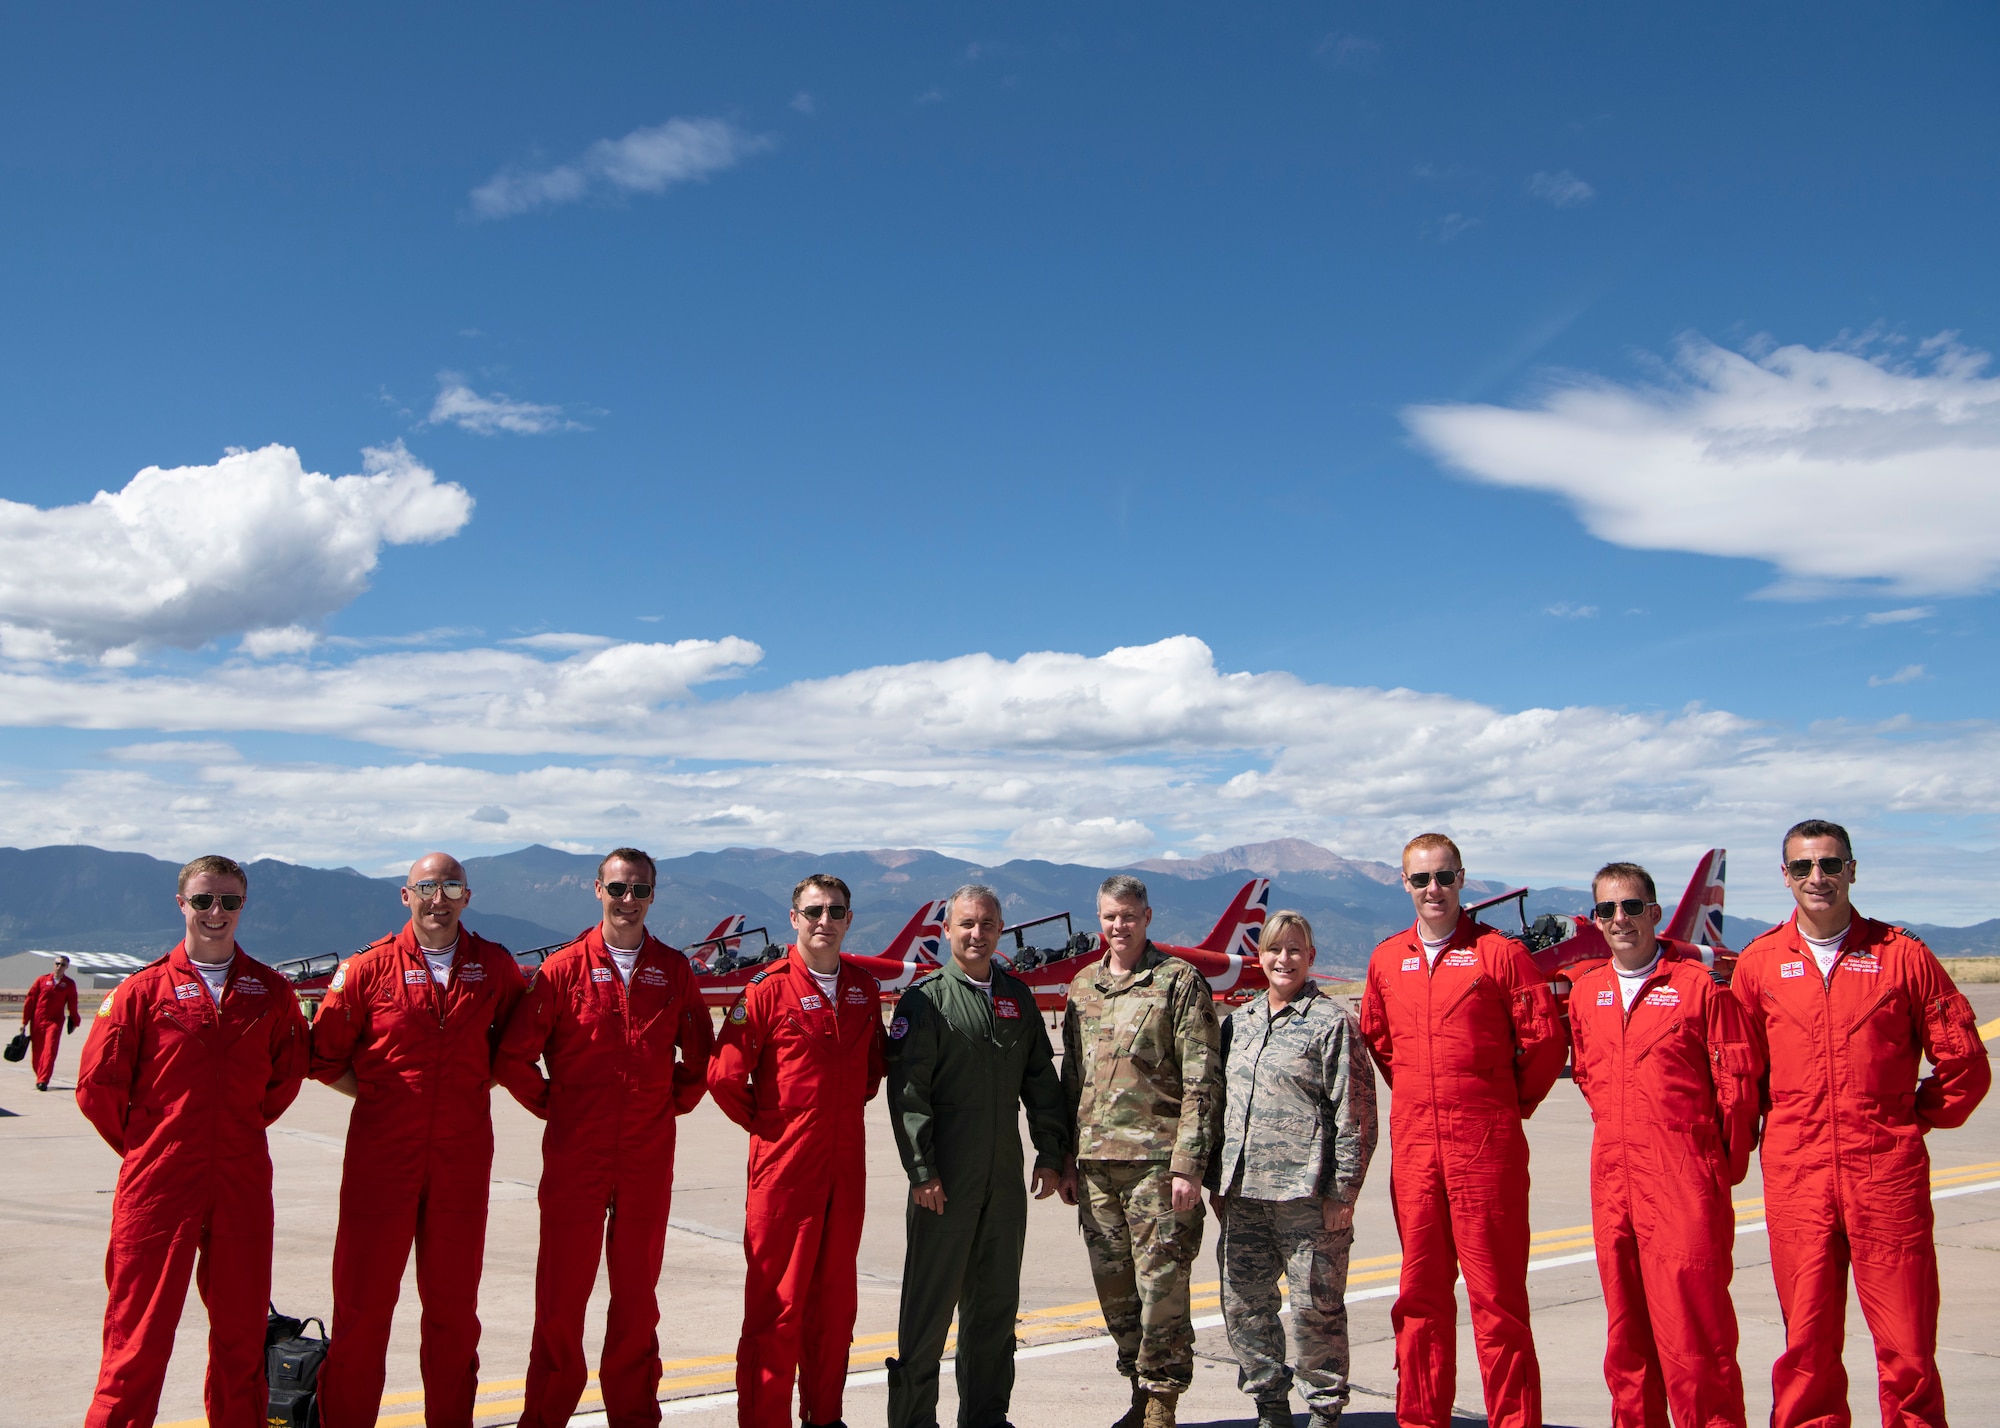 Members of the 21st Space Wing leadership team pose for a photo with members of the Red Arrows, the Royal Air Force aerial demonstration team Sept. 16, 2019 at Peterson Air Force Base, Colorado. The Red Arrows stopped at Peterson AFB as part of their 2019 North American tour. (U.S. Air Force photo by Heather Heiney)